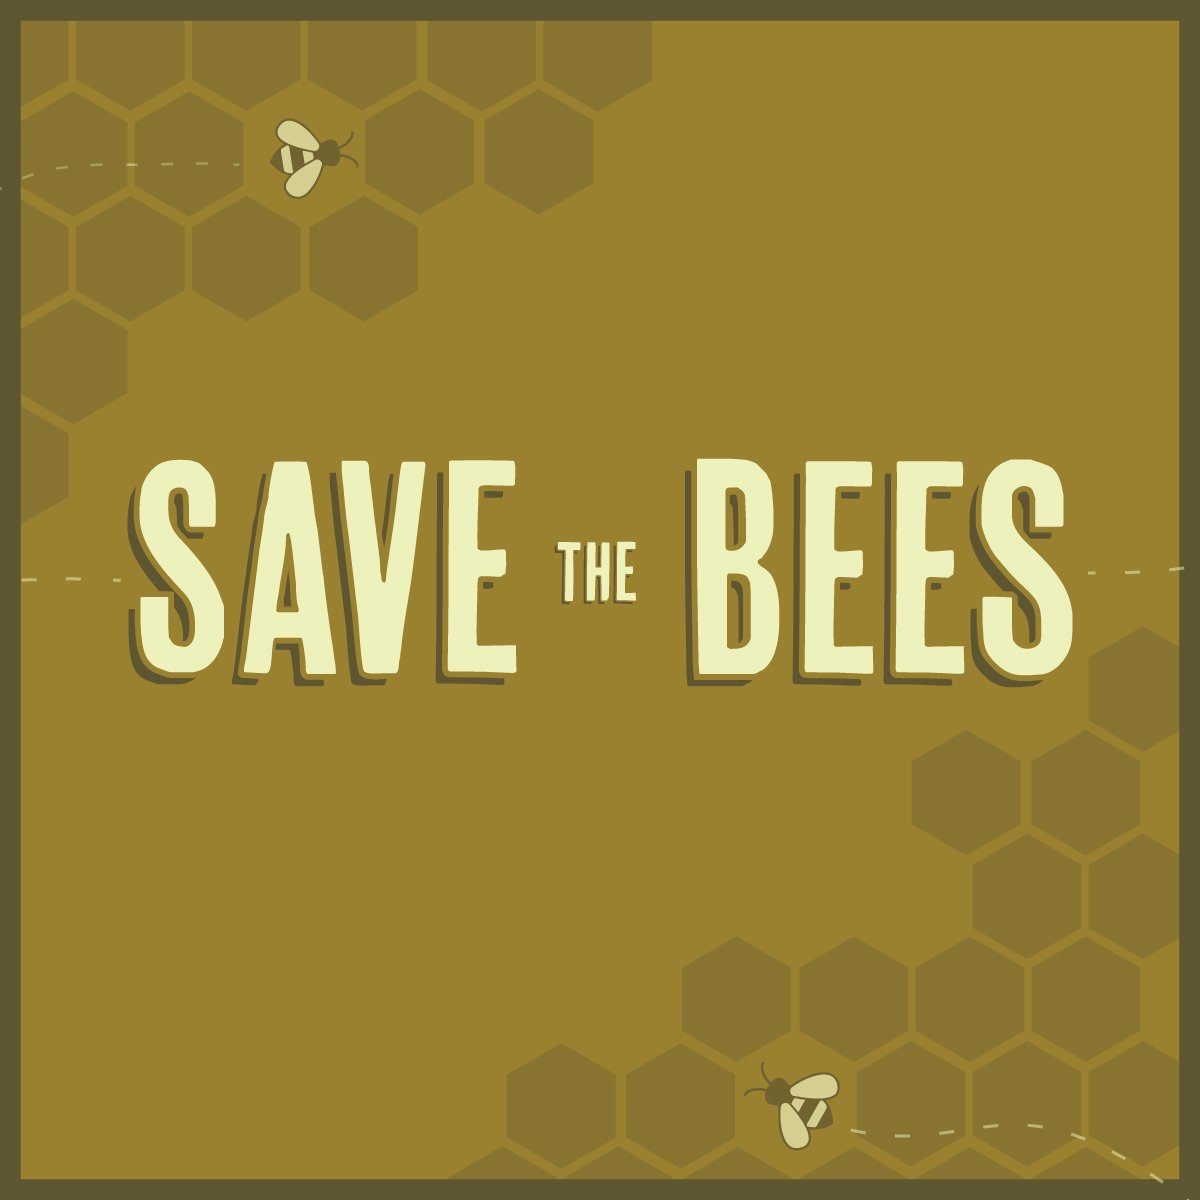 Save-The-Bees.jpg